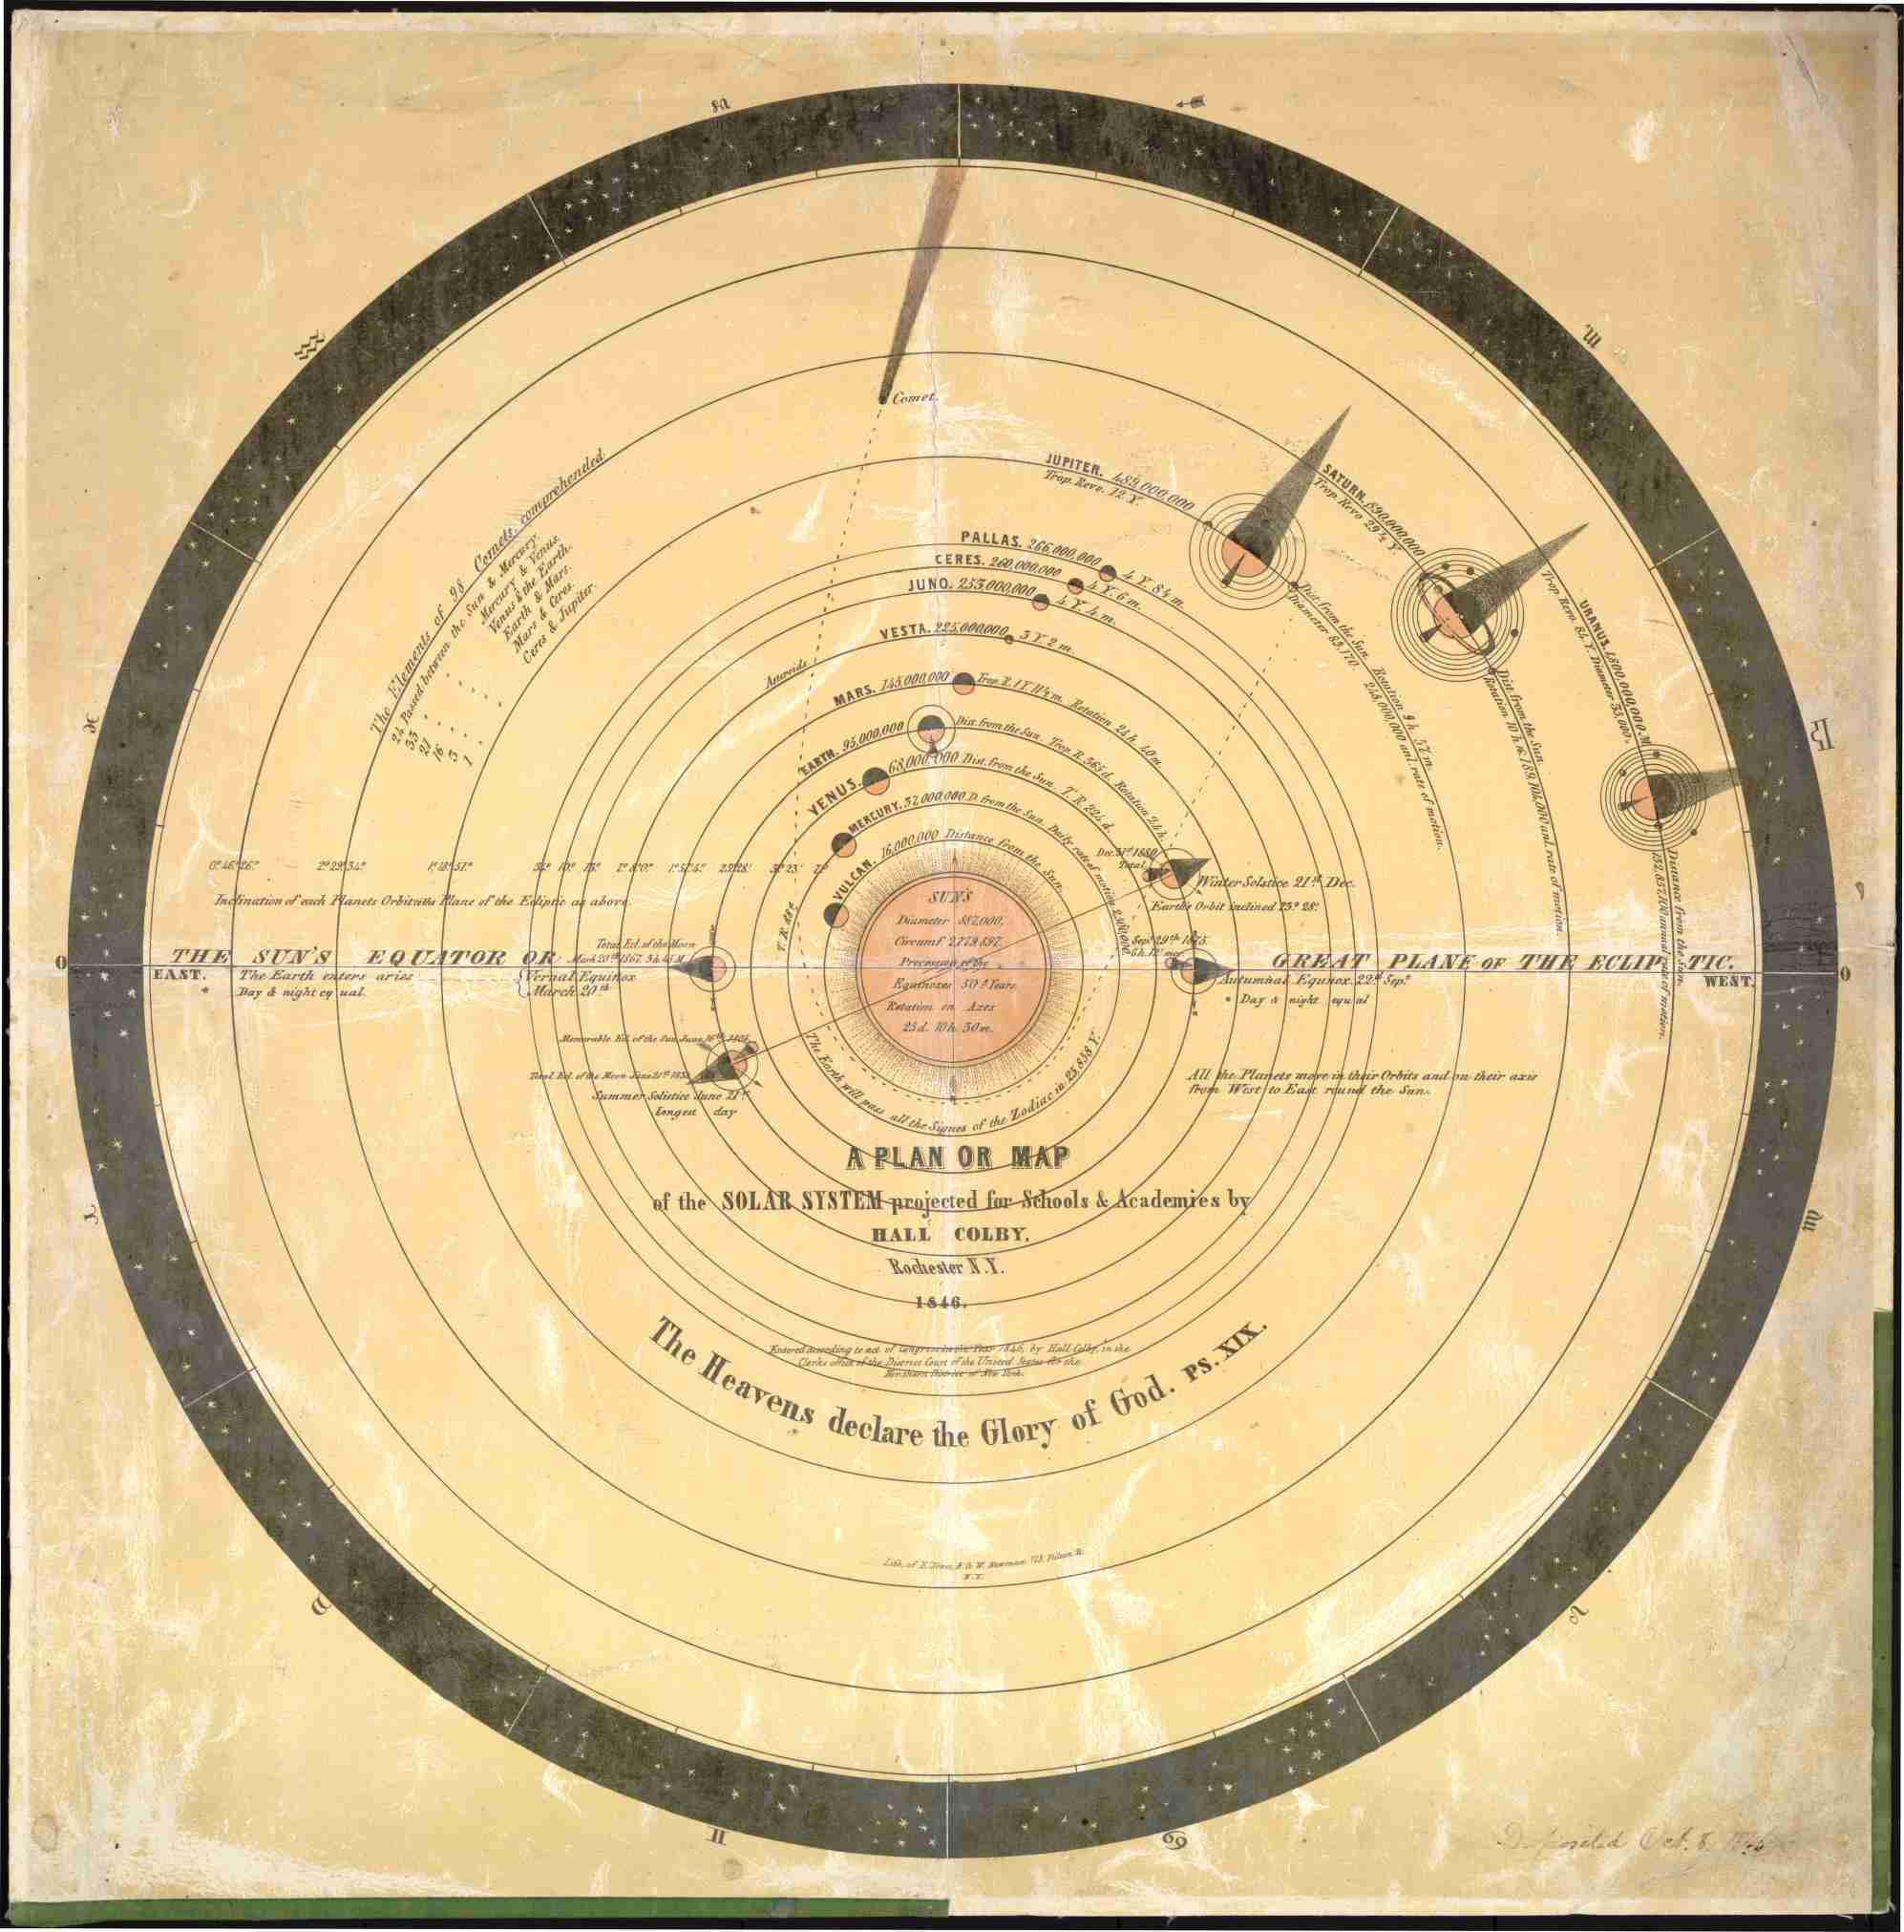 Heliocentric map of the known solar system in 1846. Orbits are shown as circular lines. It shows the known planets of the time as well as known asteroids. The planet Vulcan is also shown on the map, which does not actually exist.